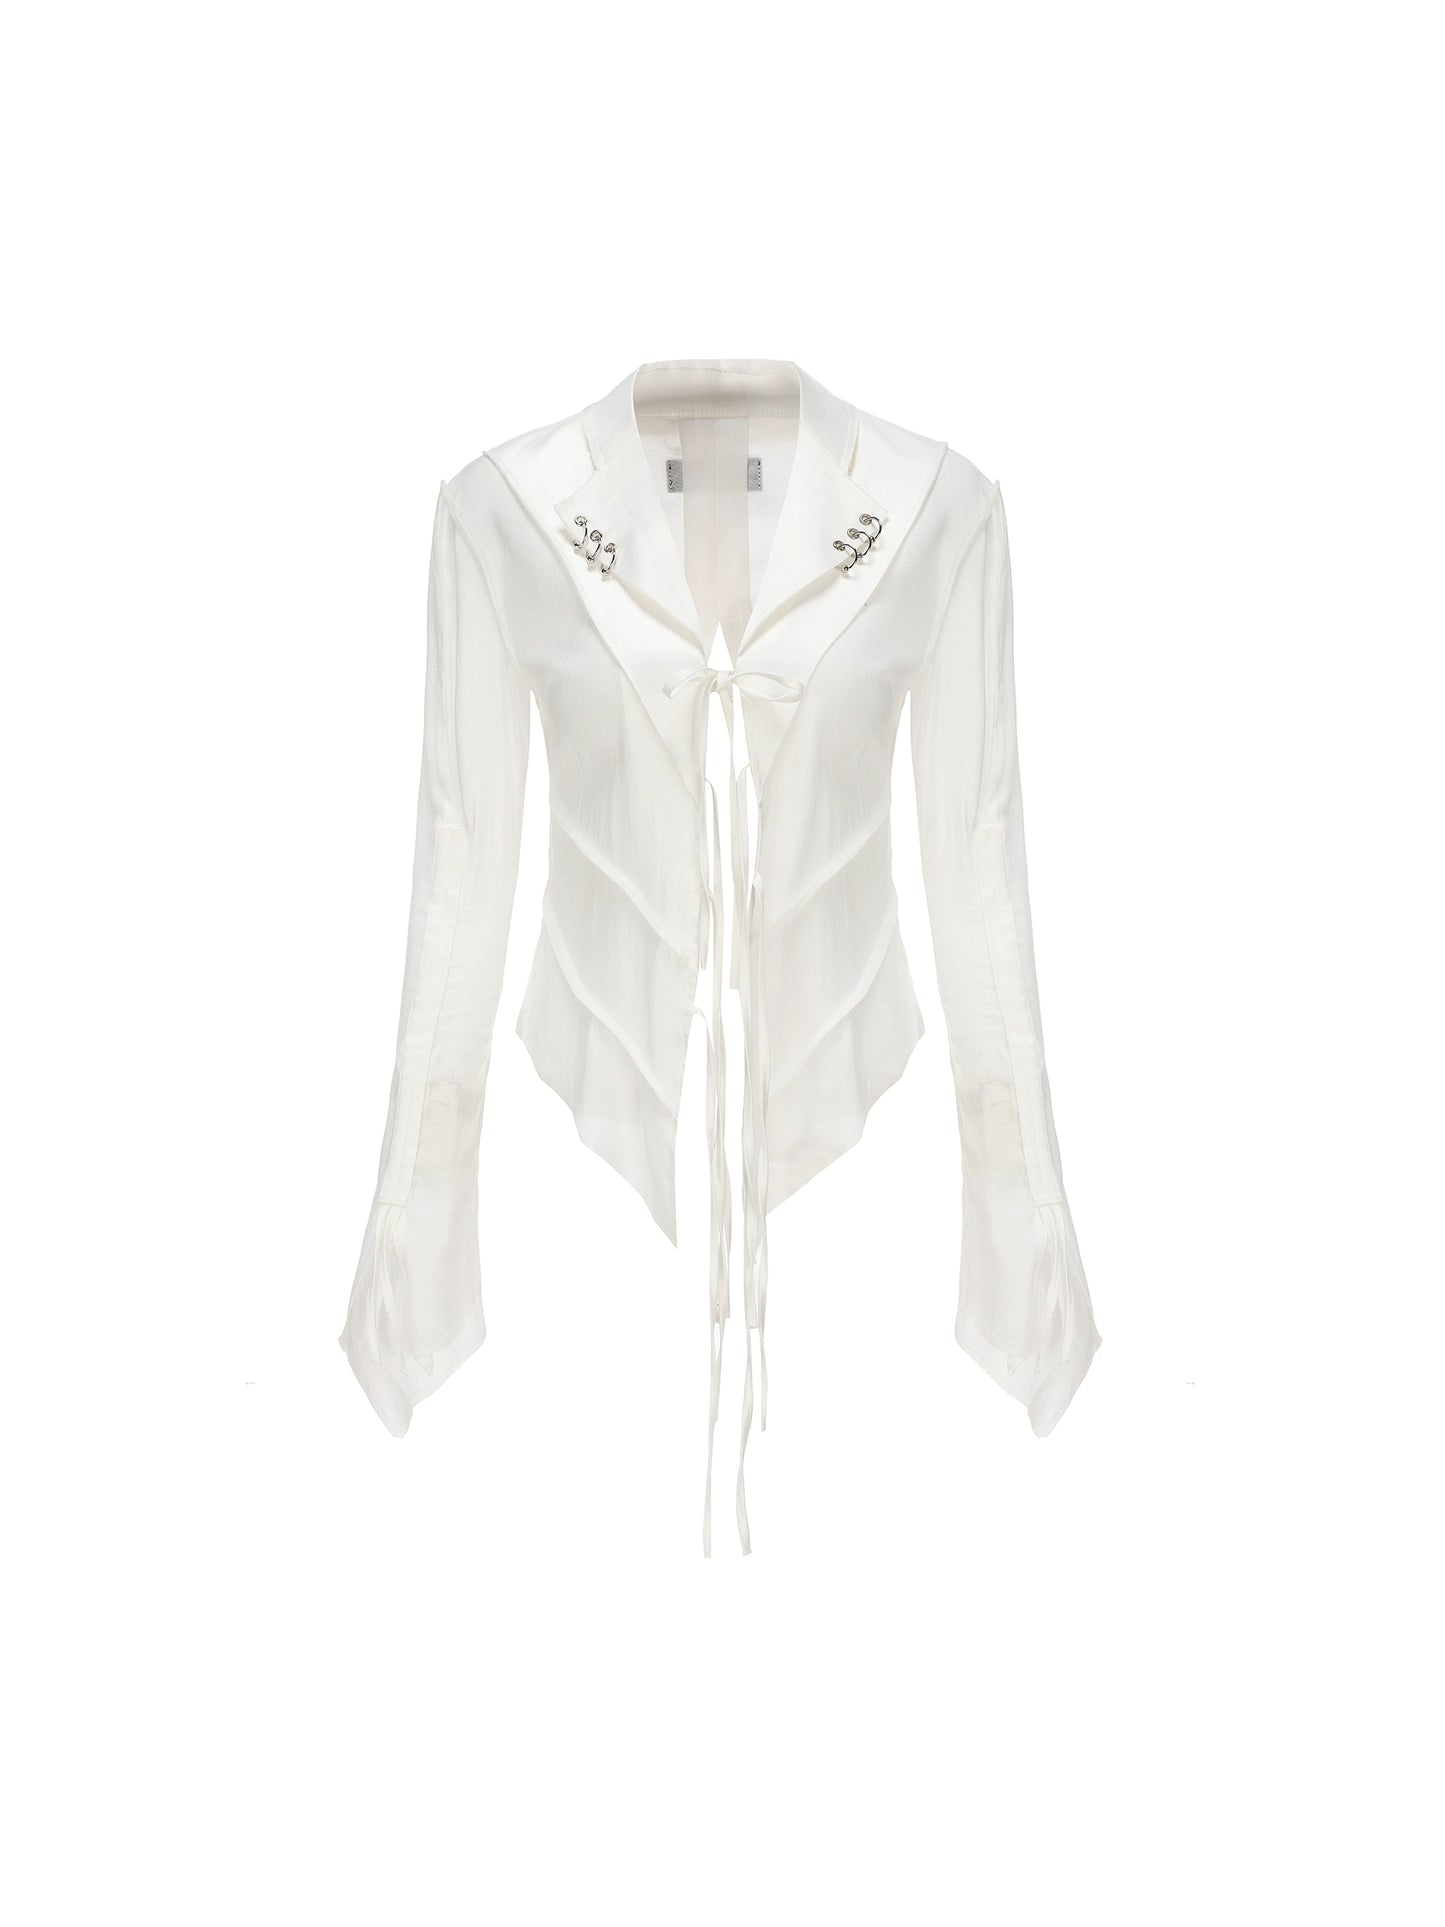 Lace Up Shirt - Repositionable Fashion